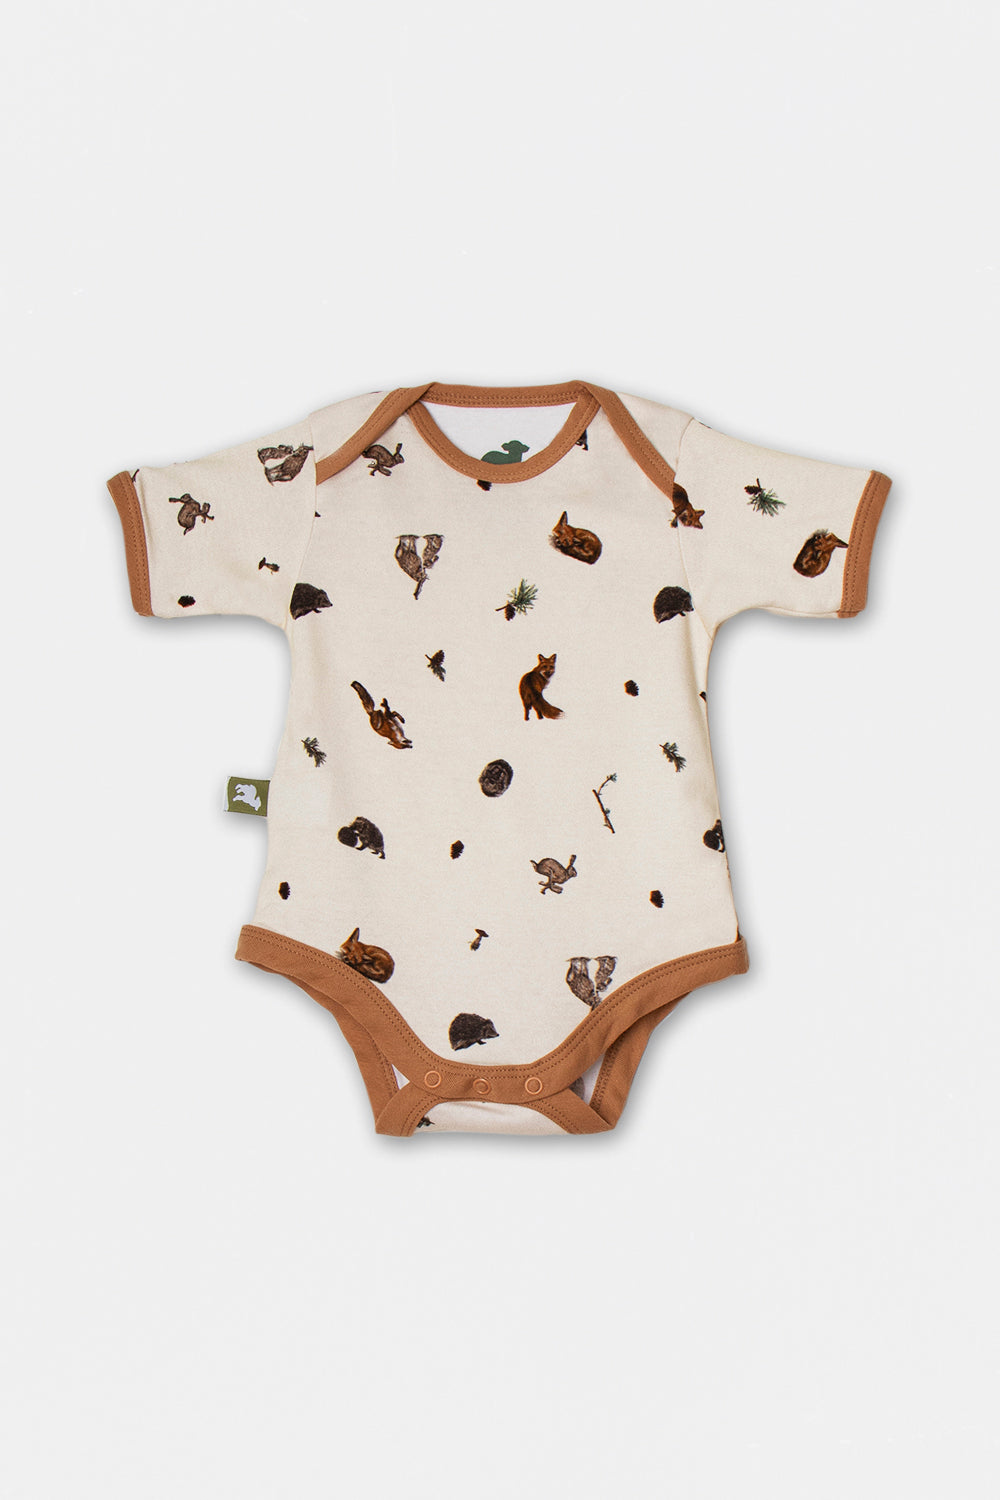 Over the Fence Bodysuit